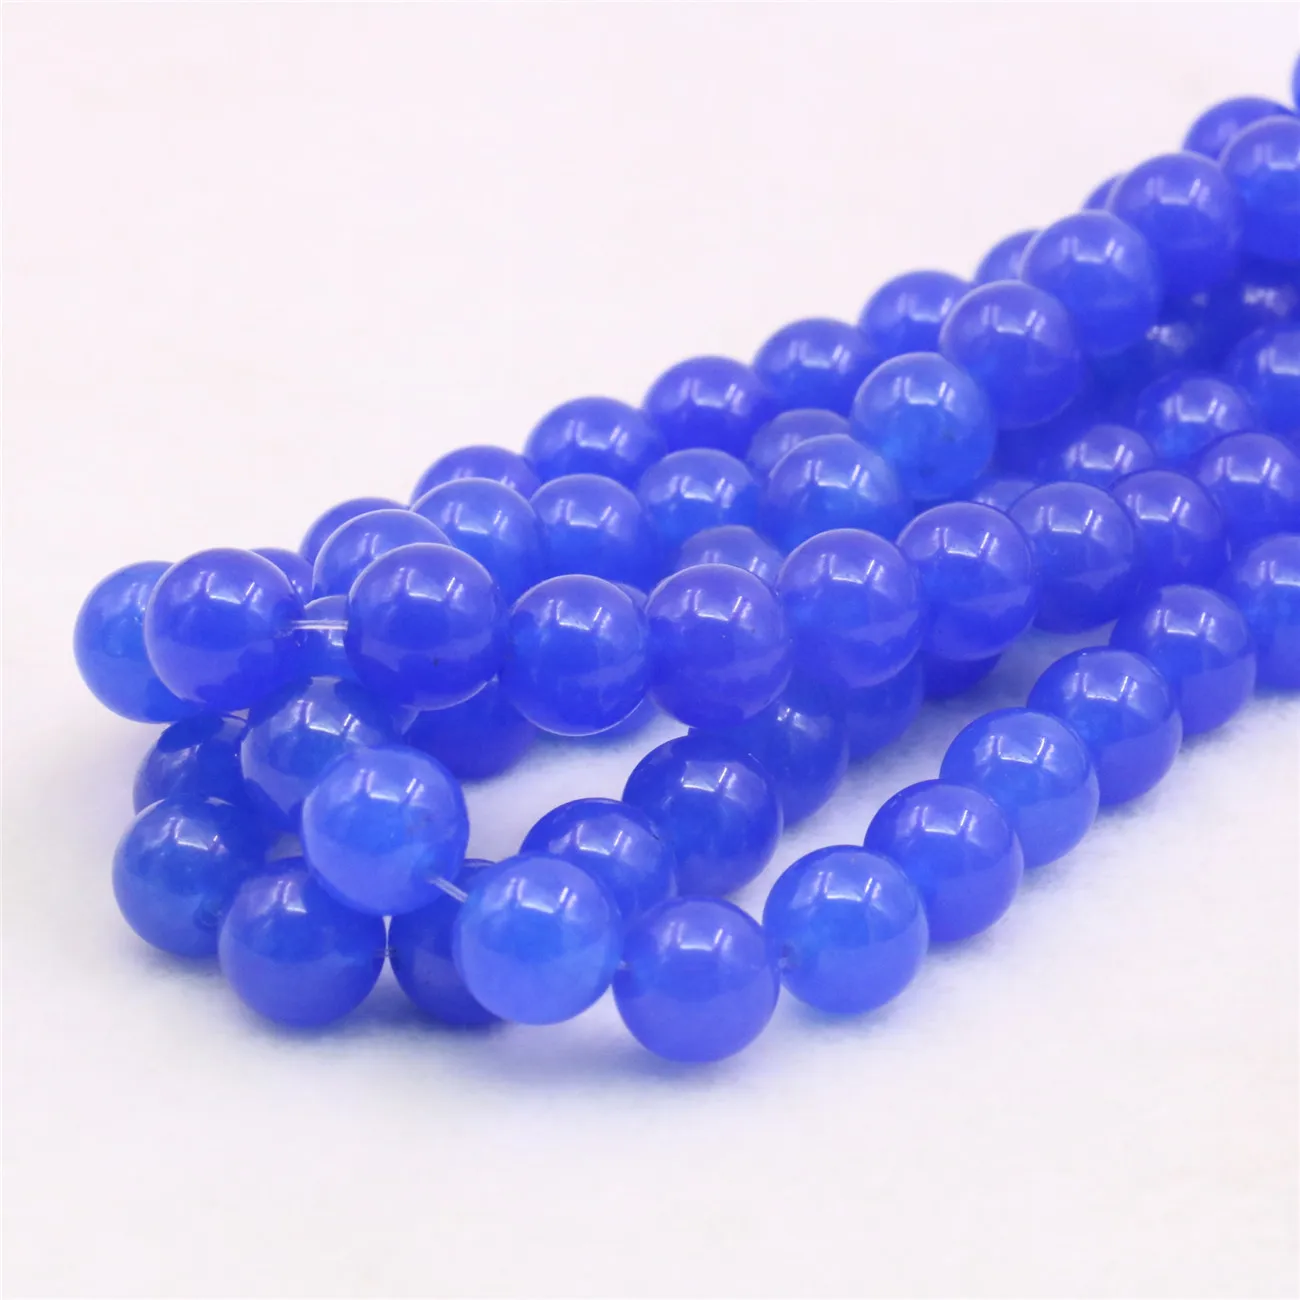 

10mm Round Blue Jades Chalcedony Loose Beads Natural Stone Women Girls Accessories DIY Parts Hand Made Fashion Jewelry Making